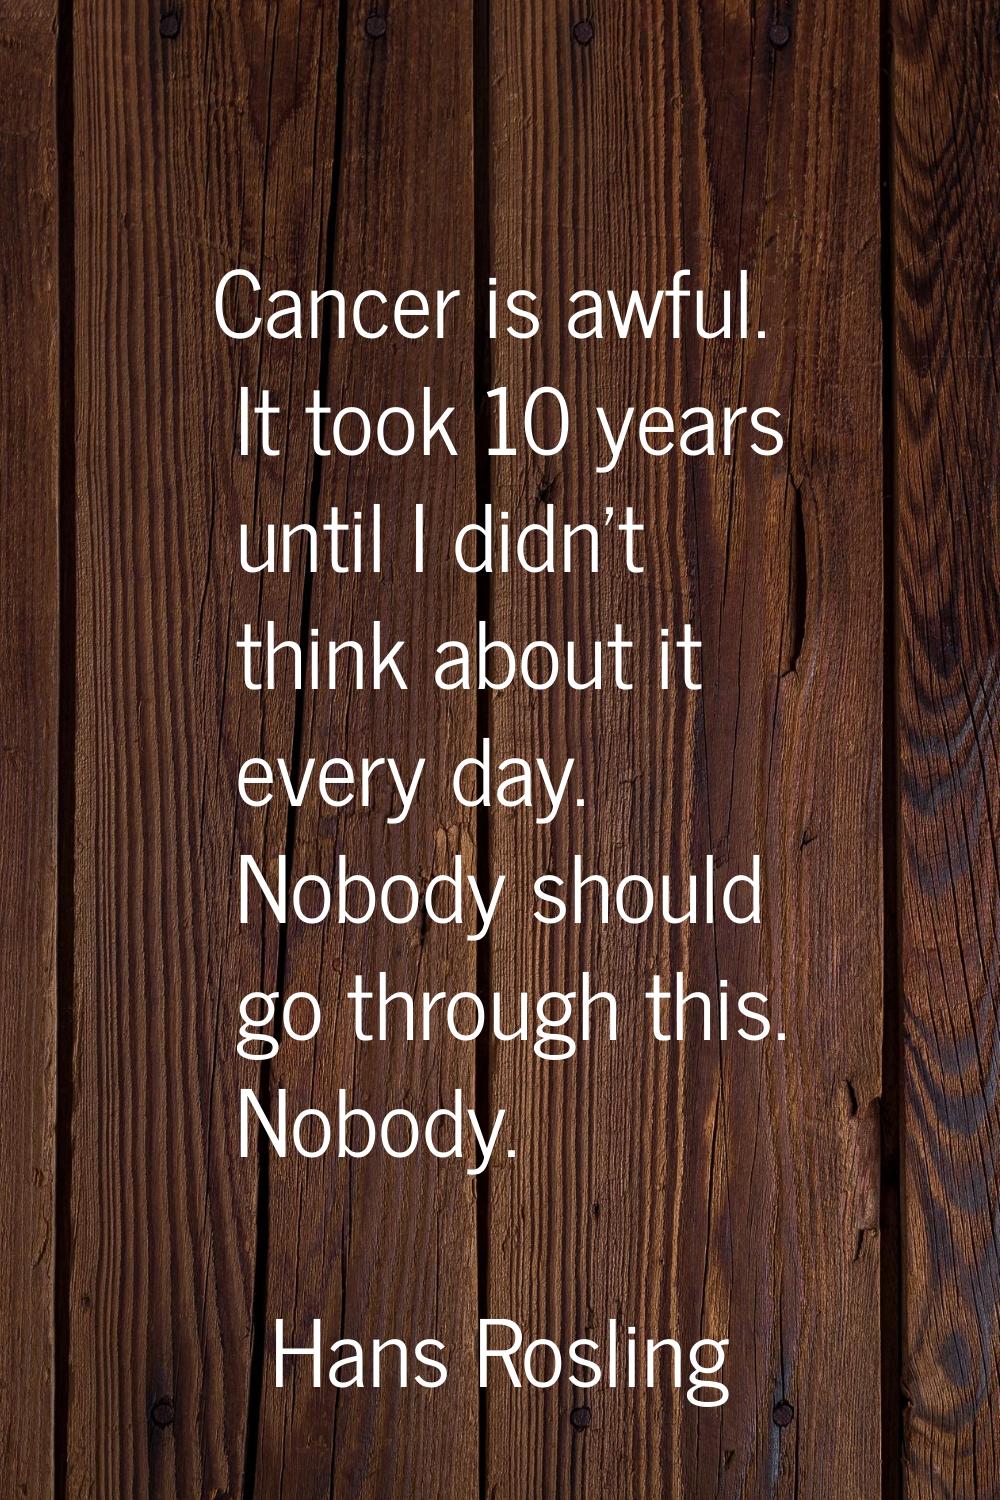 Cancer is awful. It took 10 years until I didn't think about it every day. Nobody should go through